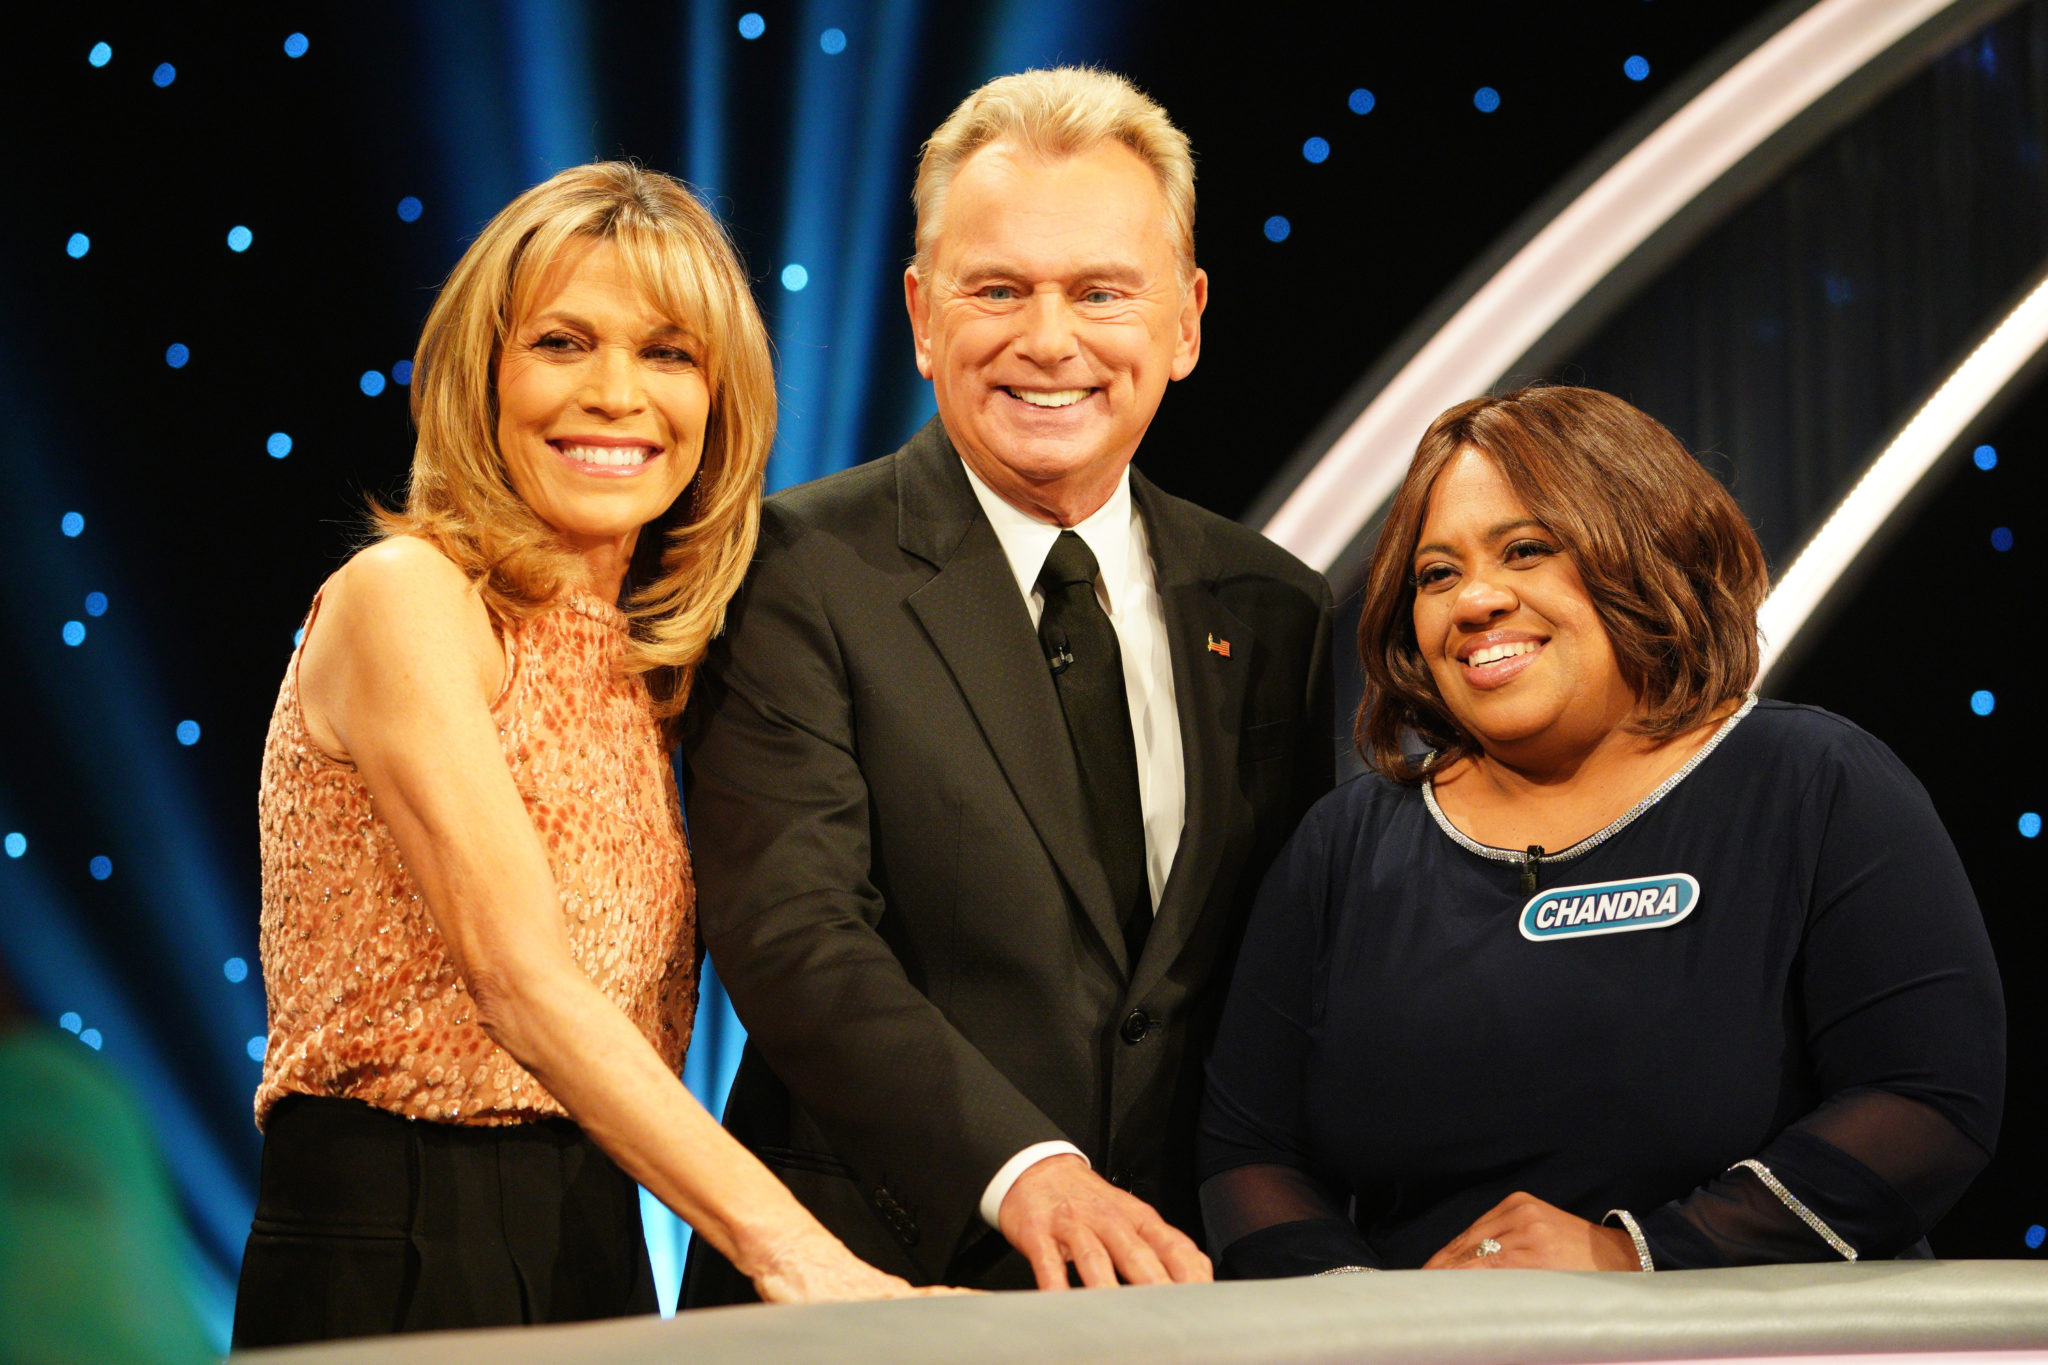 Celebrity Wheel of Fortune on ABC cancelled? season 2? (release date